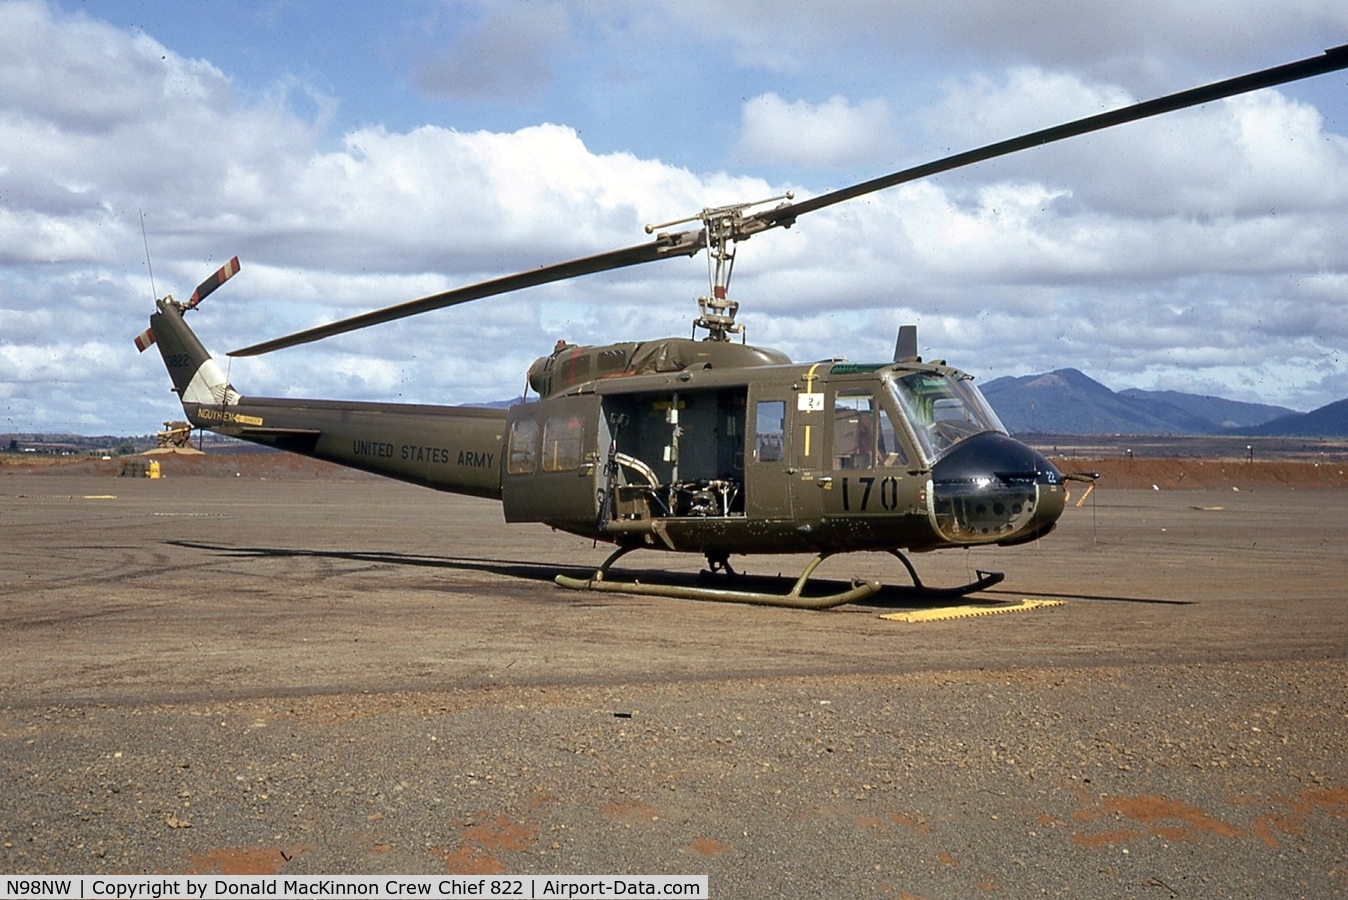 N98NW, 1964 Bell UH-1H Iroquois C/N 4529, I was the crew chief on this aircraft to me she was known as Bikini 822.  She saw a great deal of action, but at the end of each day, she had one more mission.  The mission was to bring us home, and she did.